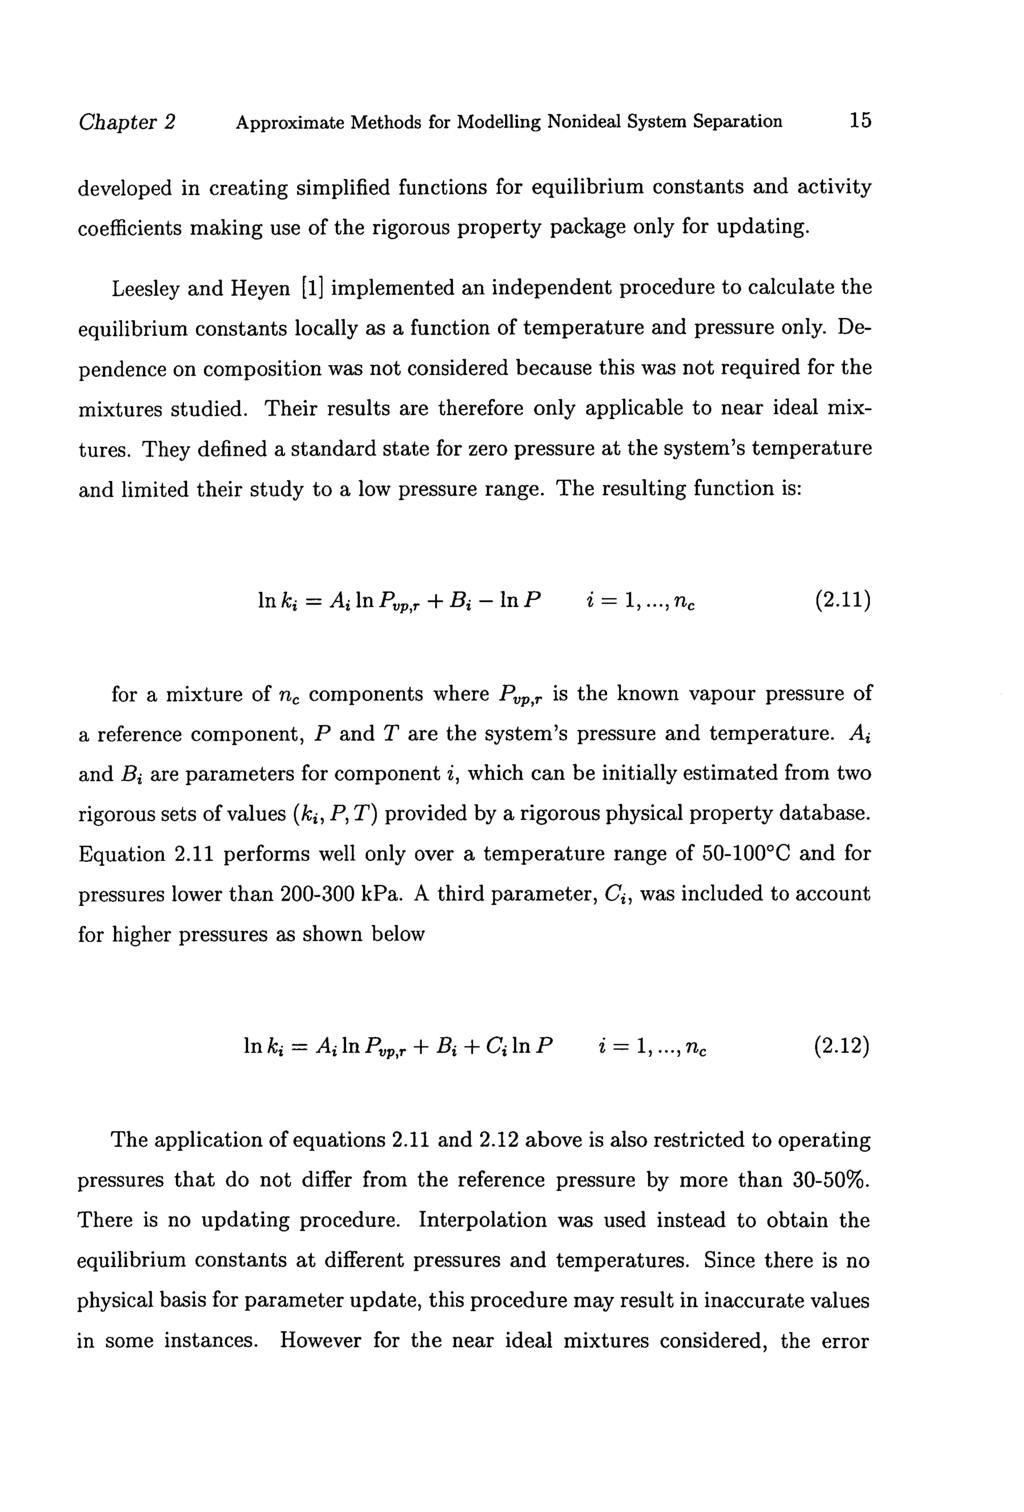 Chapter 2 Approximate Methods for Modelling Nonideal System Separation 15 developed in creating simplified functions for equilibrium constants and activity coefficients making use of the rigorous